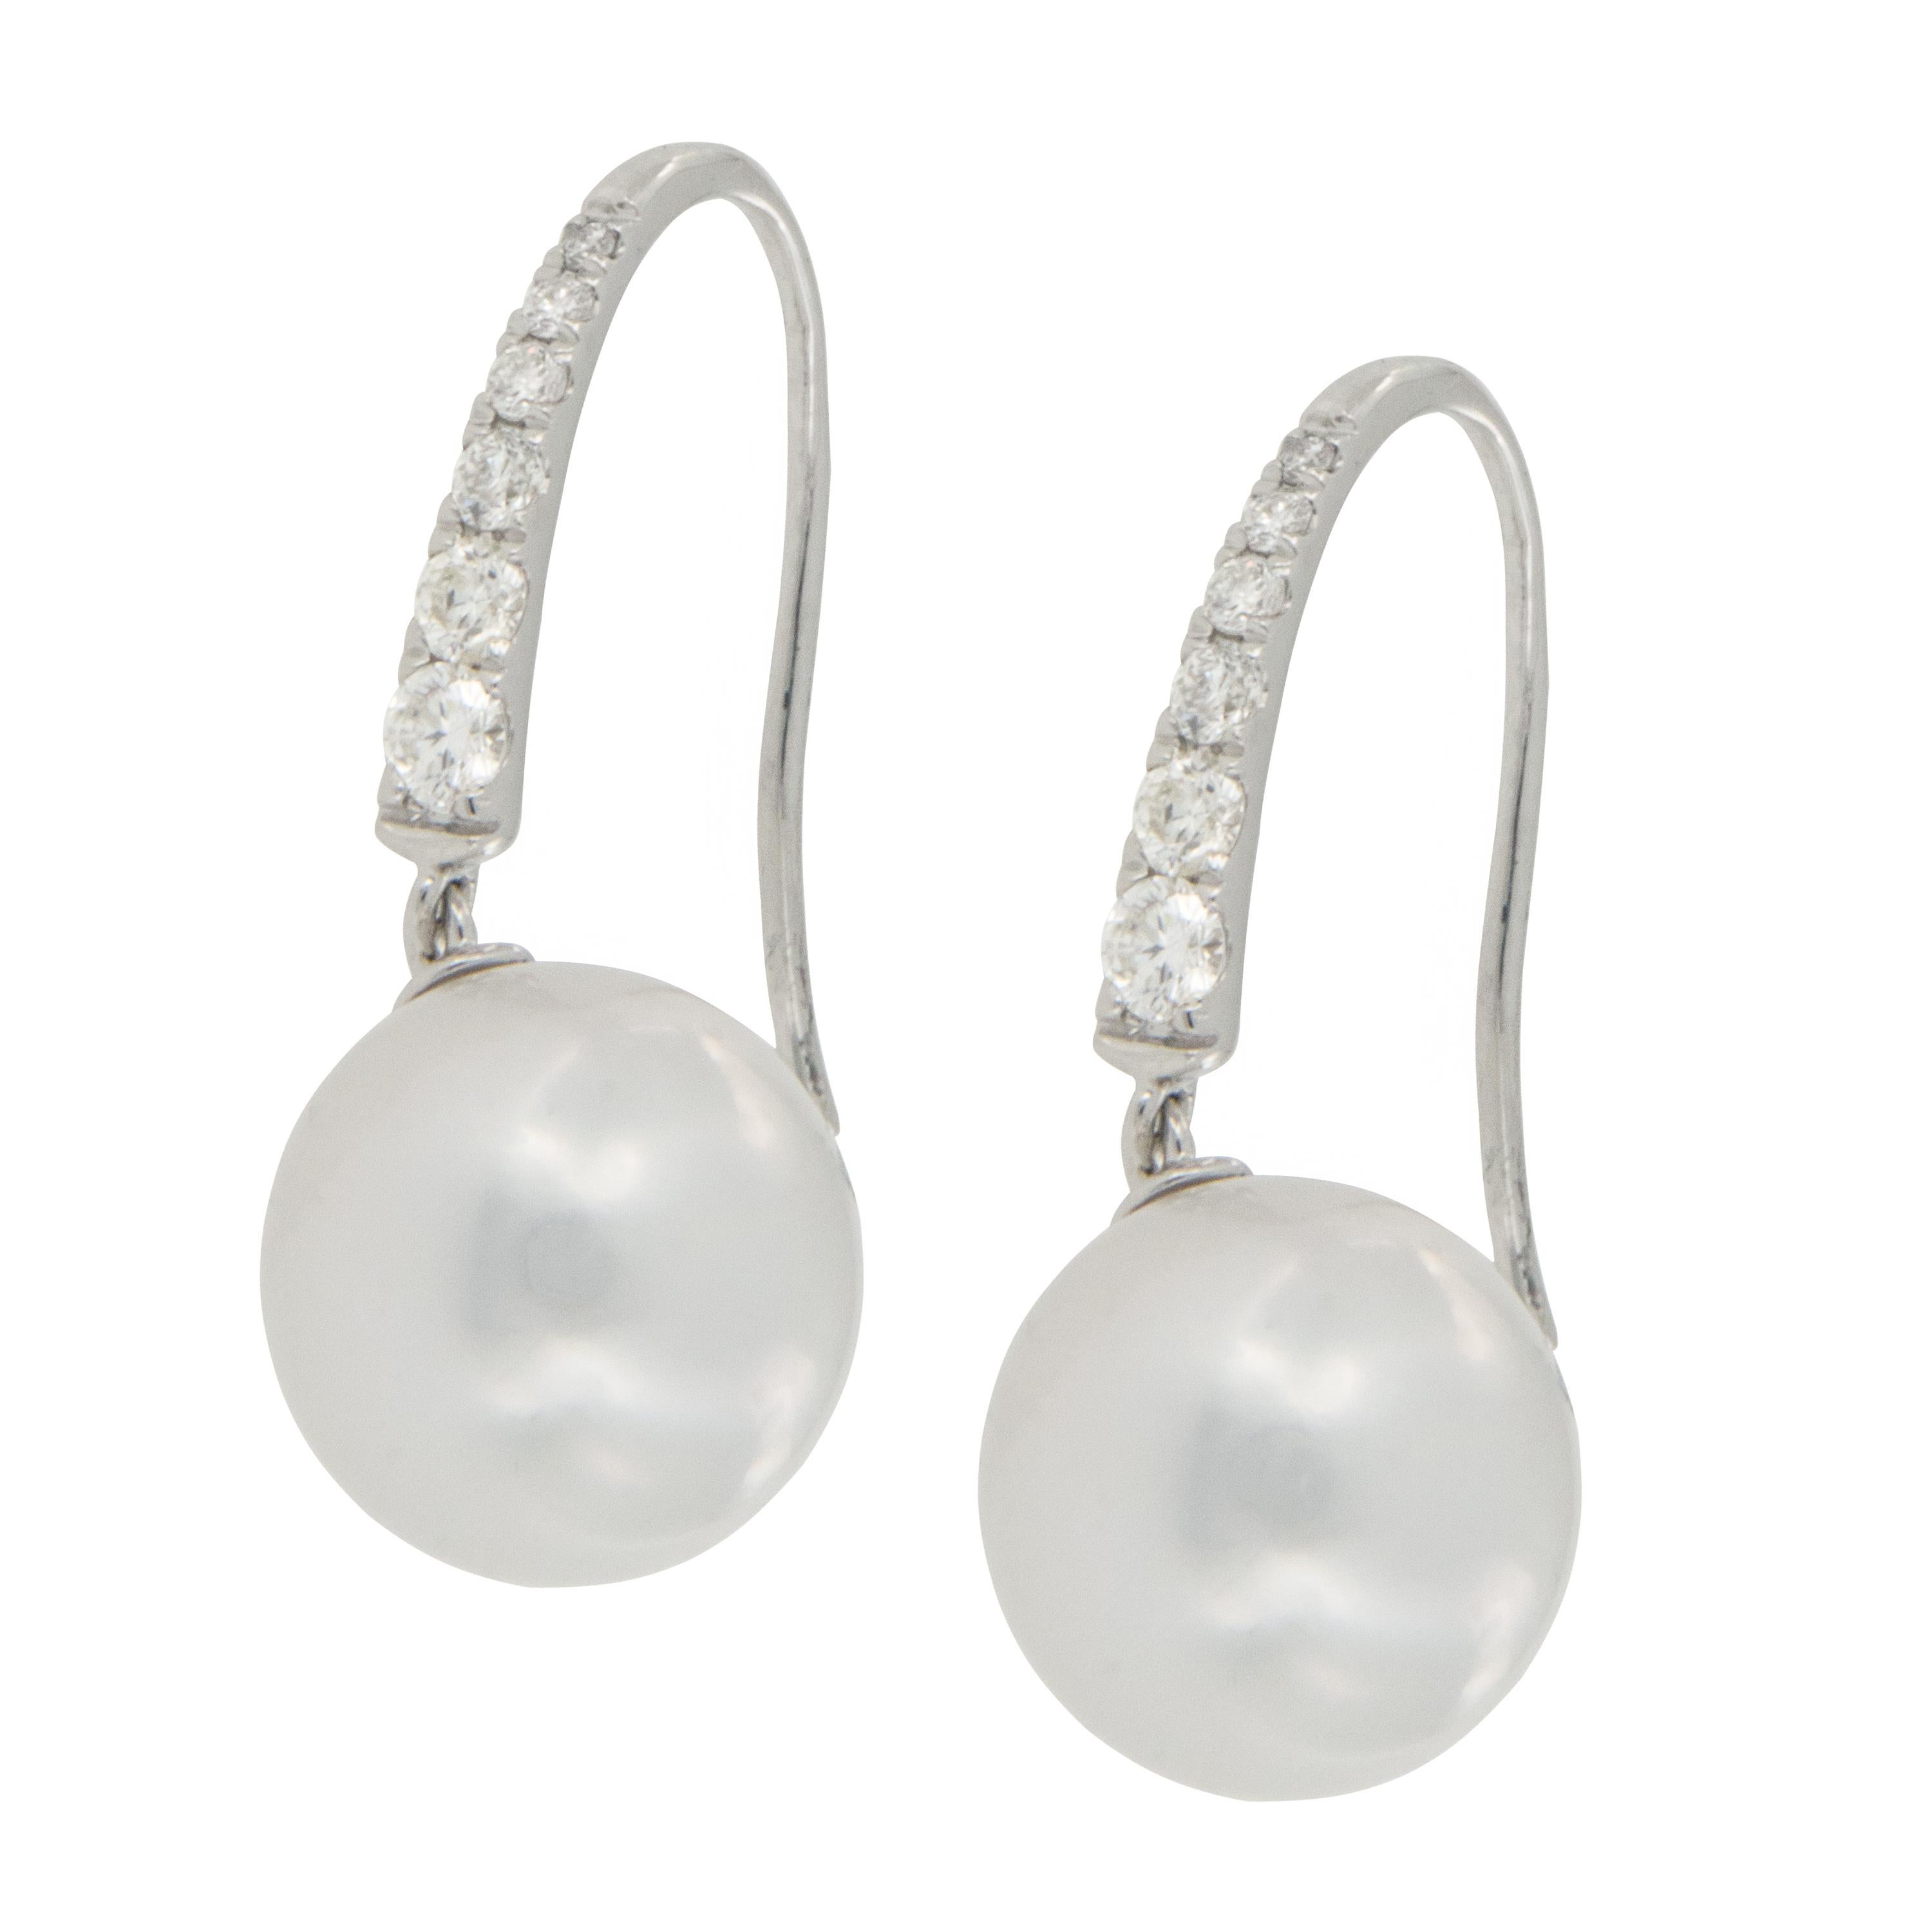 Can you say CLASSIC?! These perfectly matched white pearls from the South Sea are beautifully paired with 0.26 graduated fine diamonds on top. Perfect for your special wedding day, every day or evening. Complimentary signature wrapping &